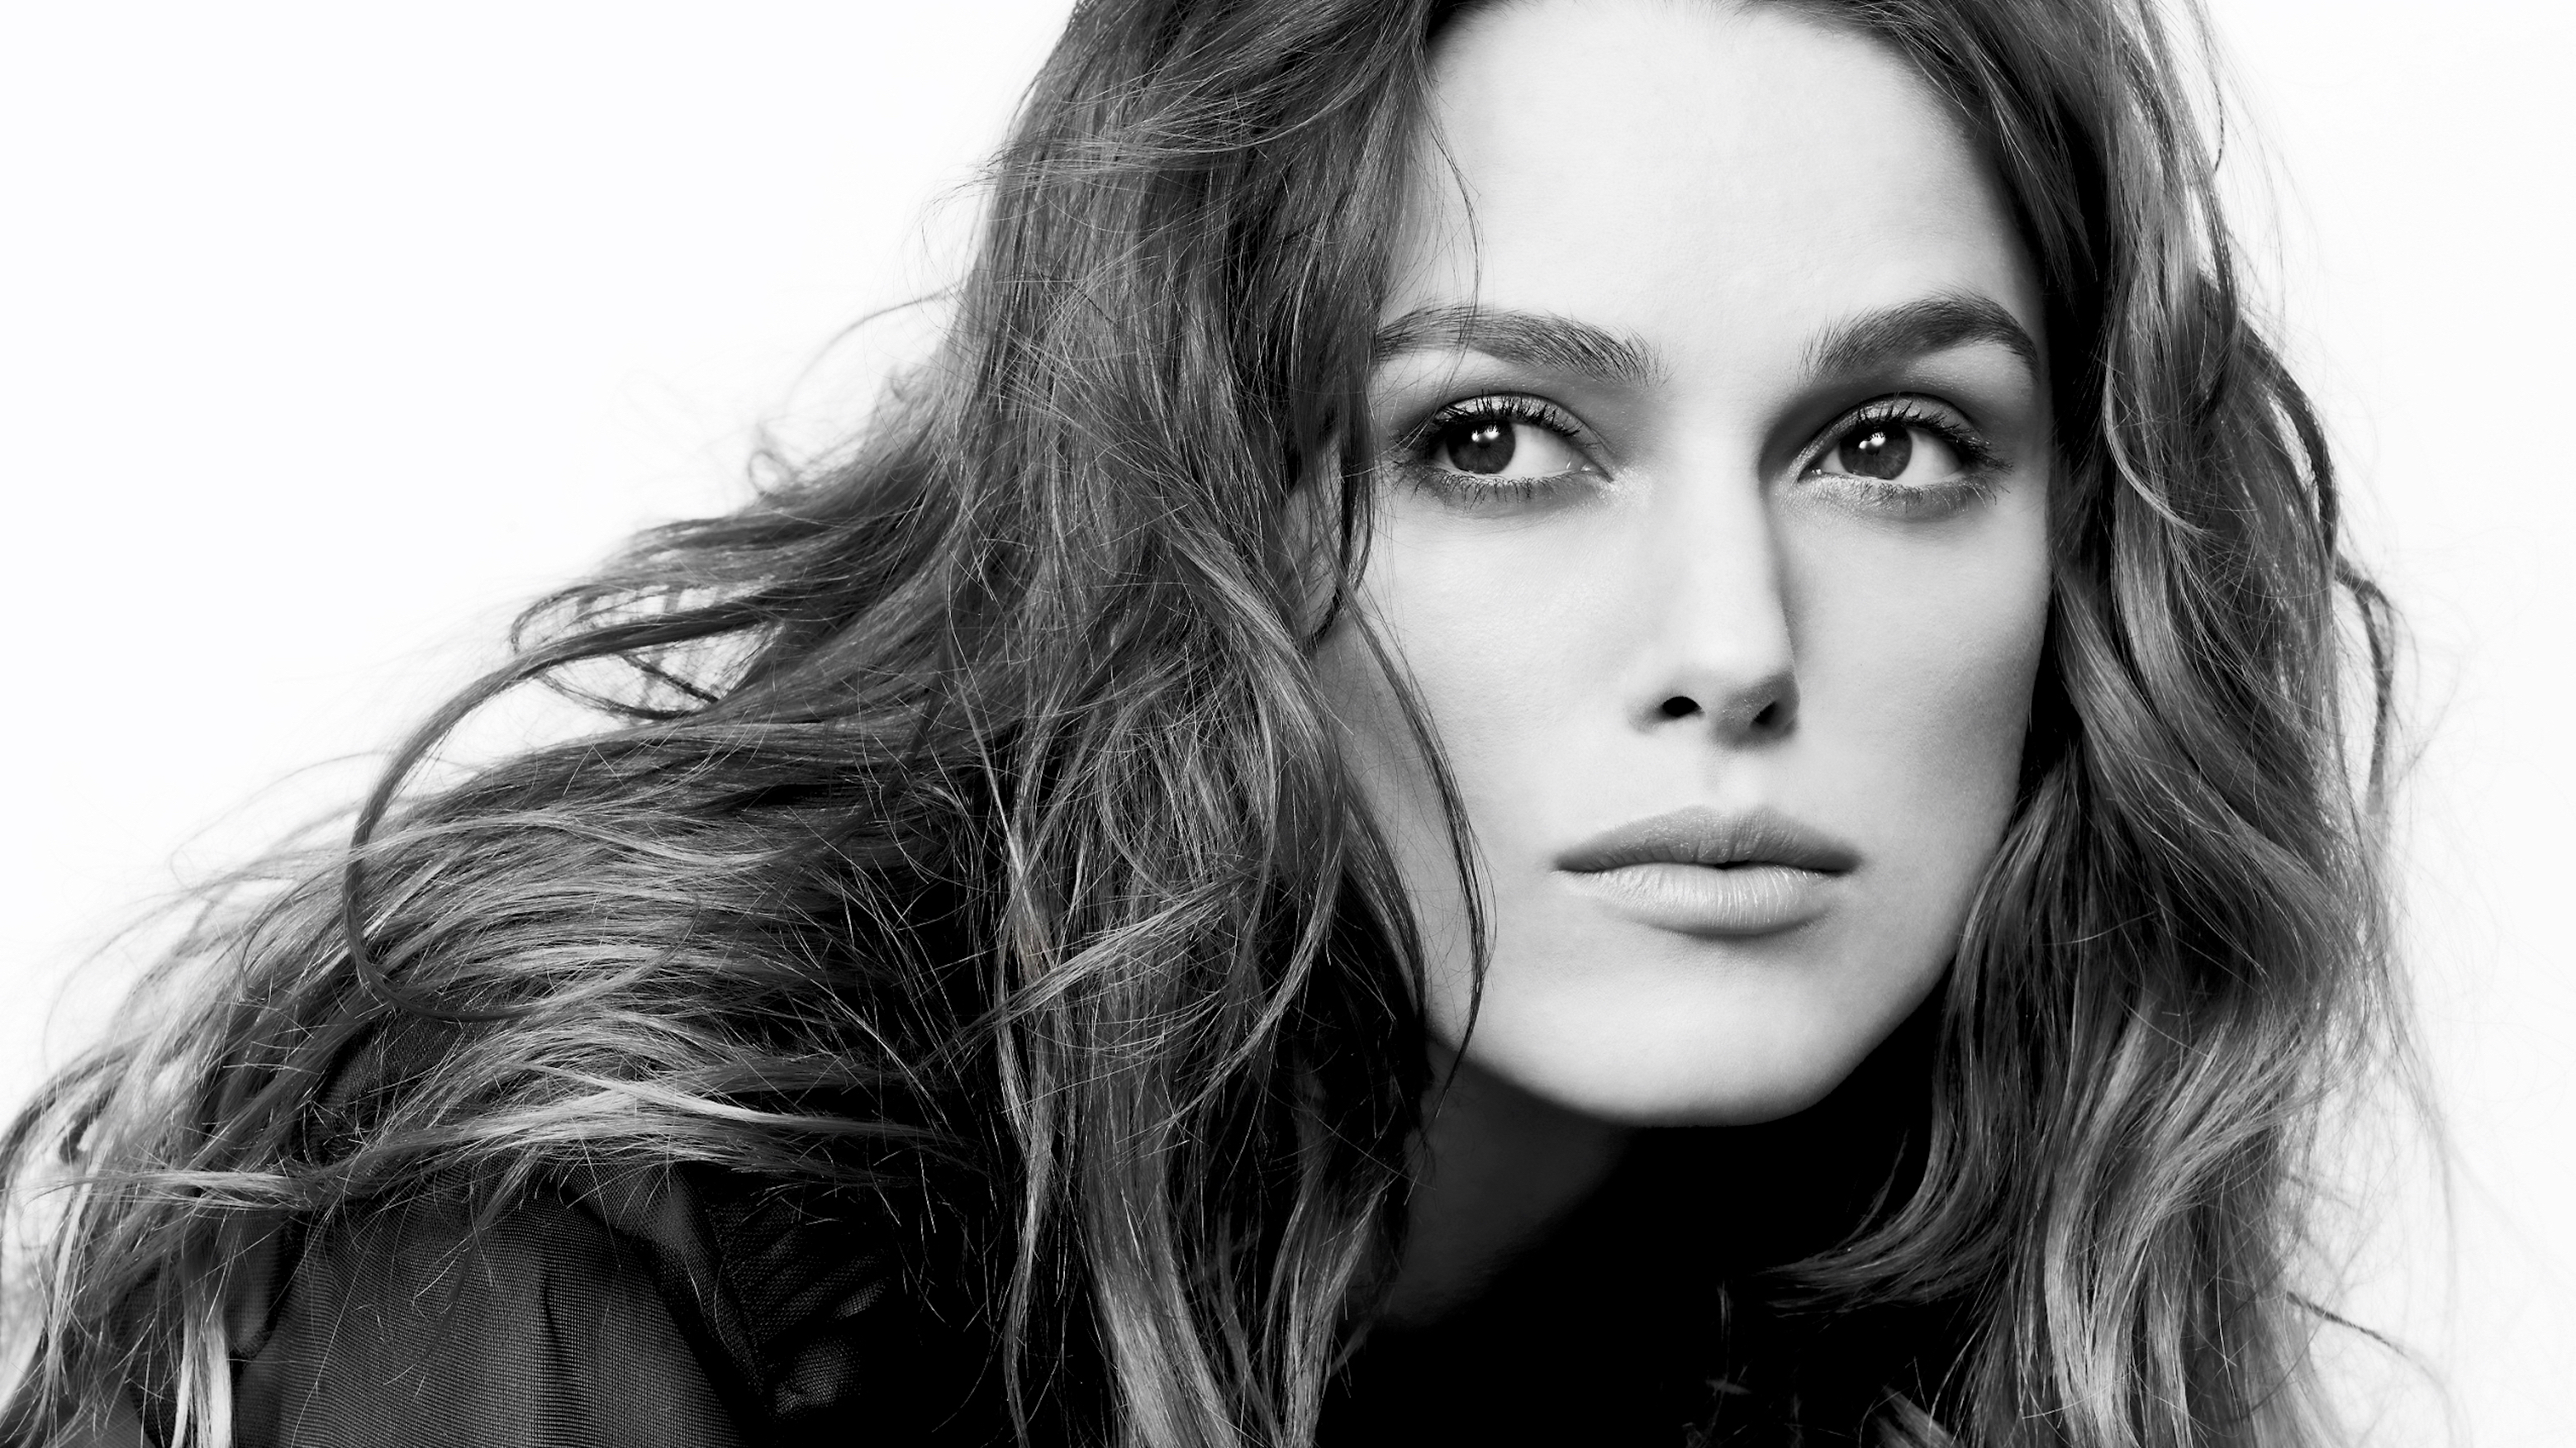 Wallpapers keira knightley actress british on the desktop